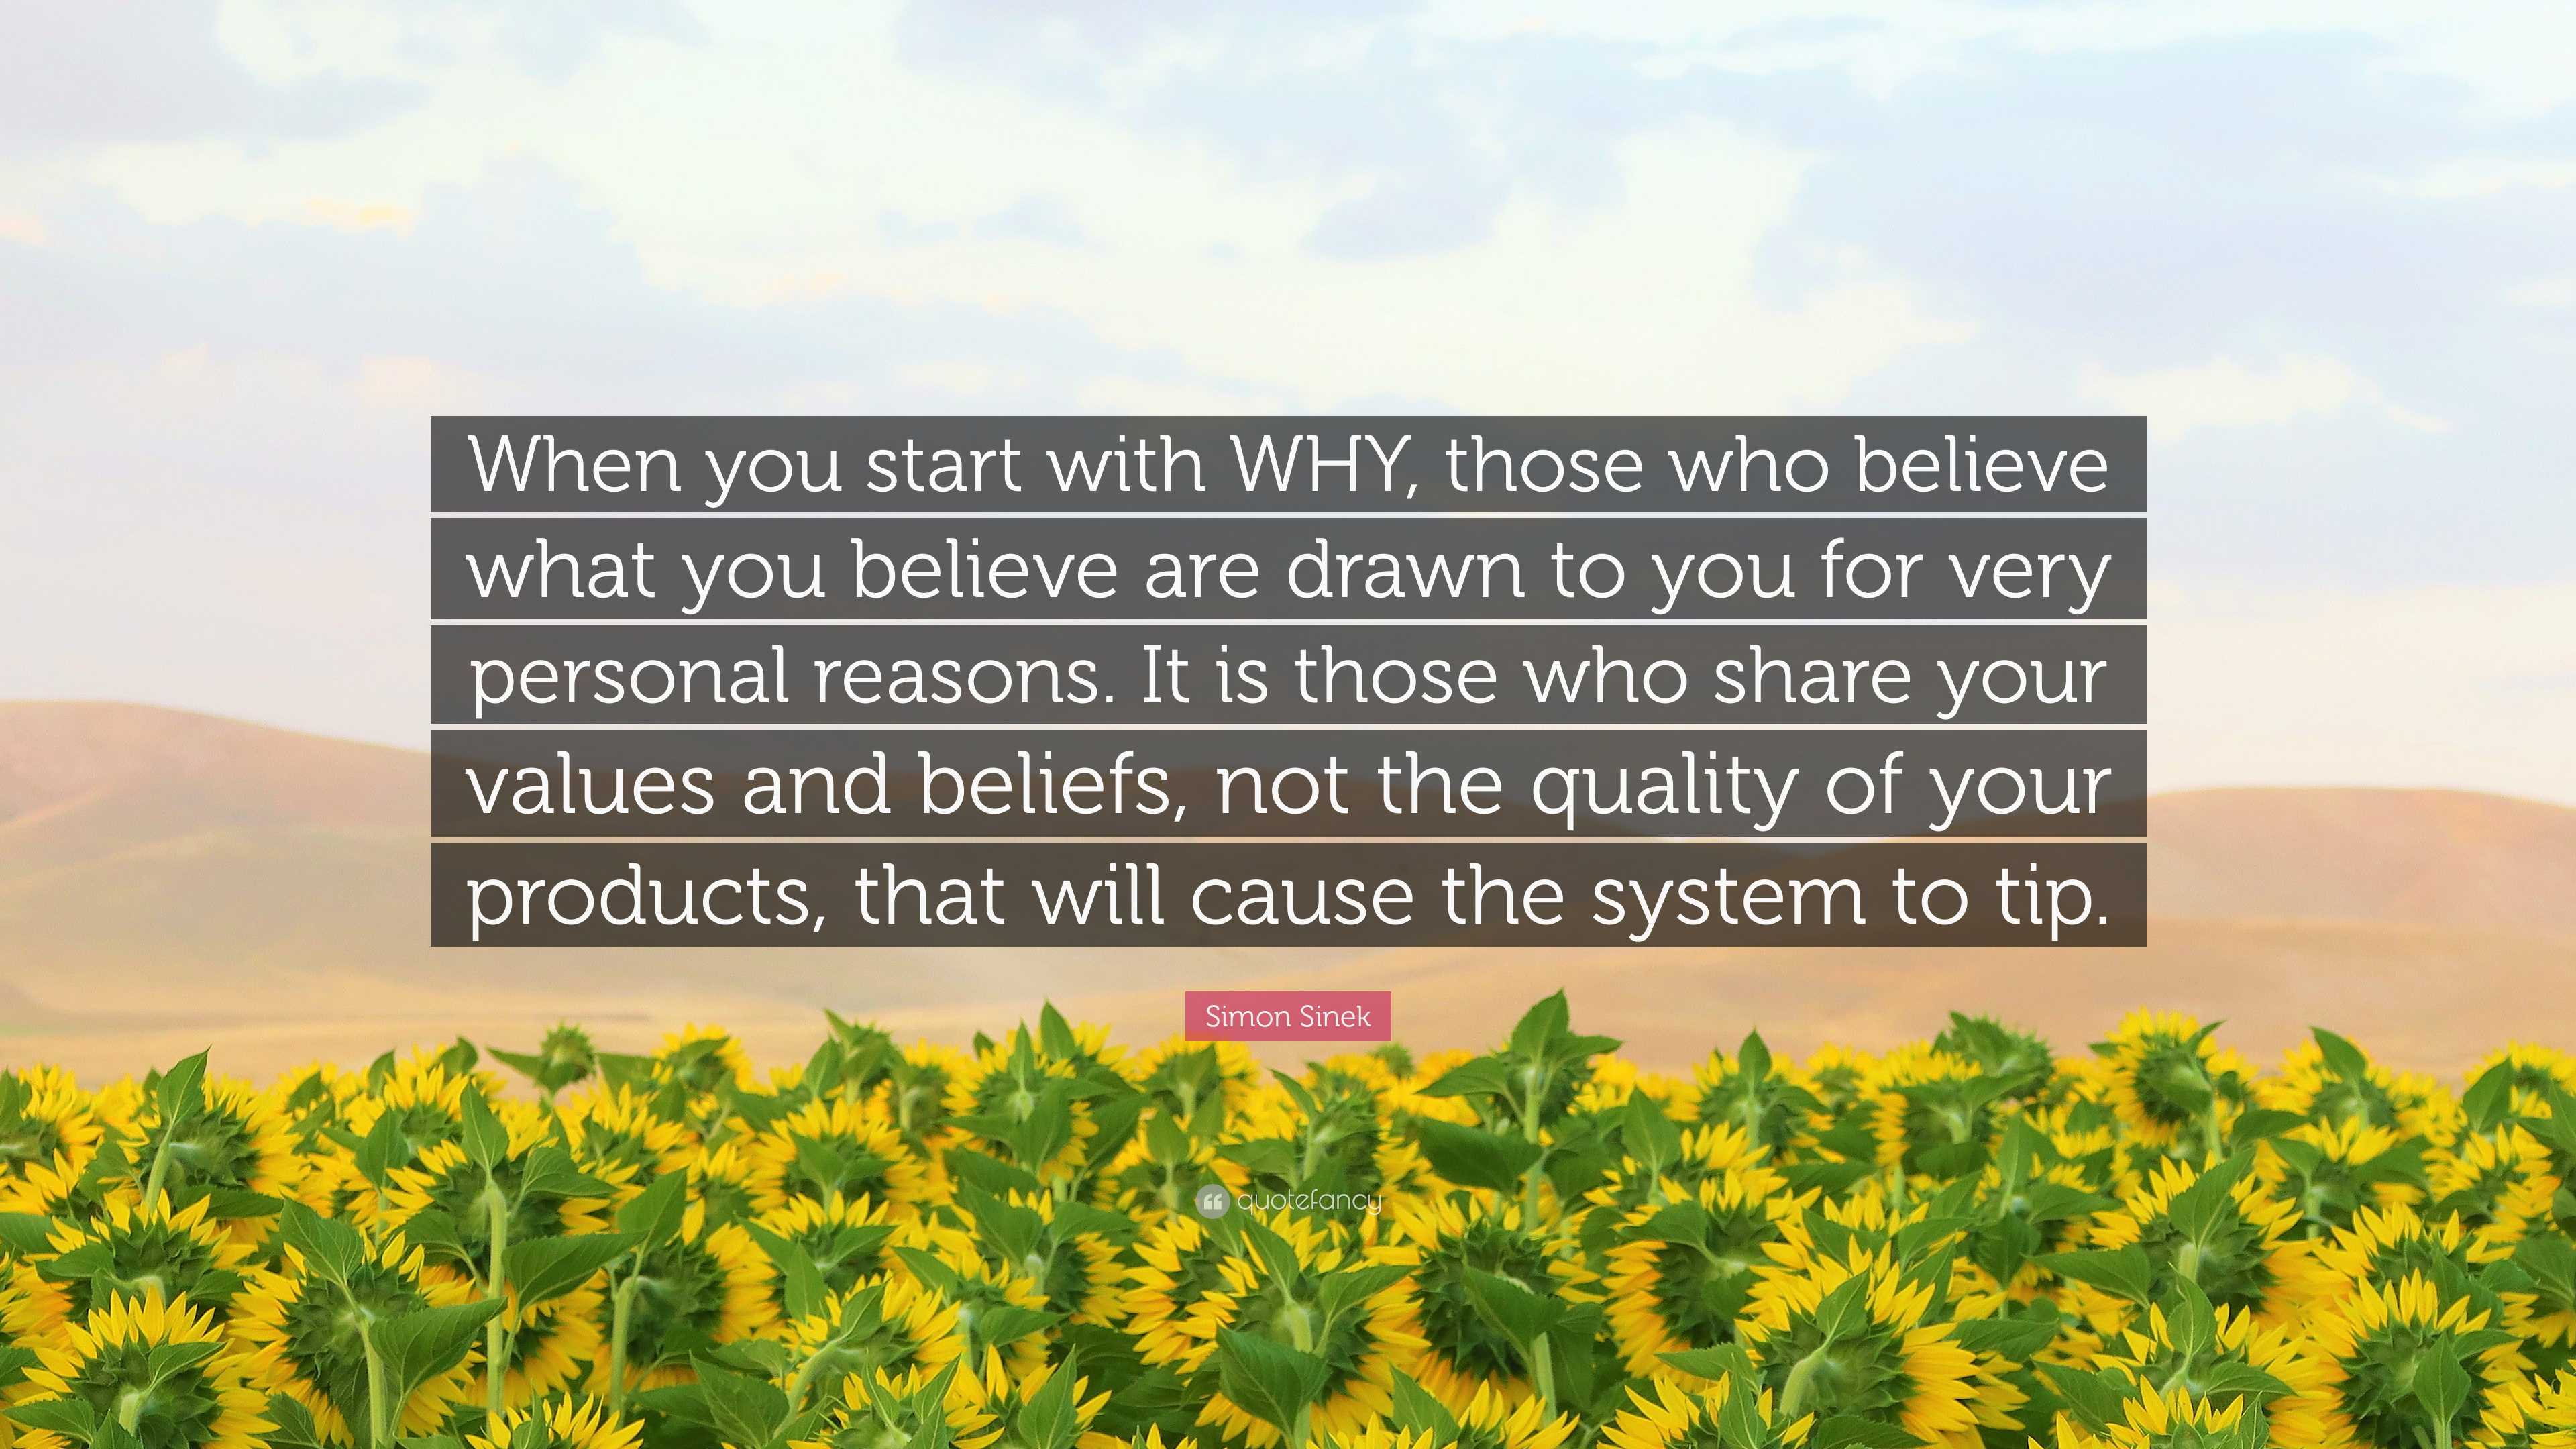 Simon Sinek Quote: “When you start with WHY, those who believe what you  believe are drawn to you for very personal reasons. It is those who ”